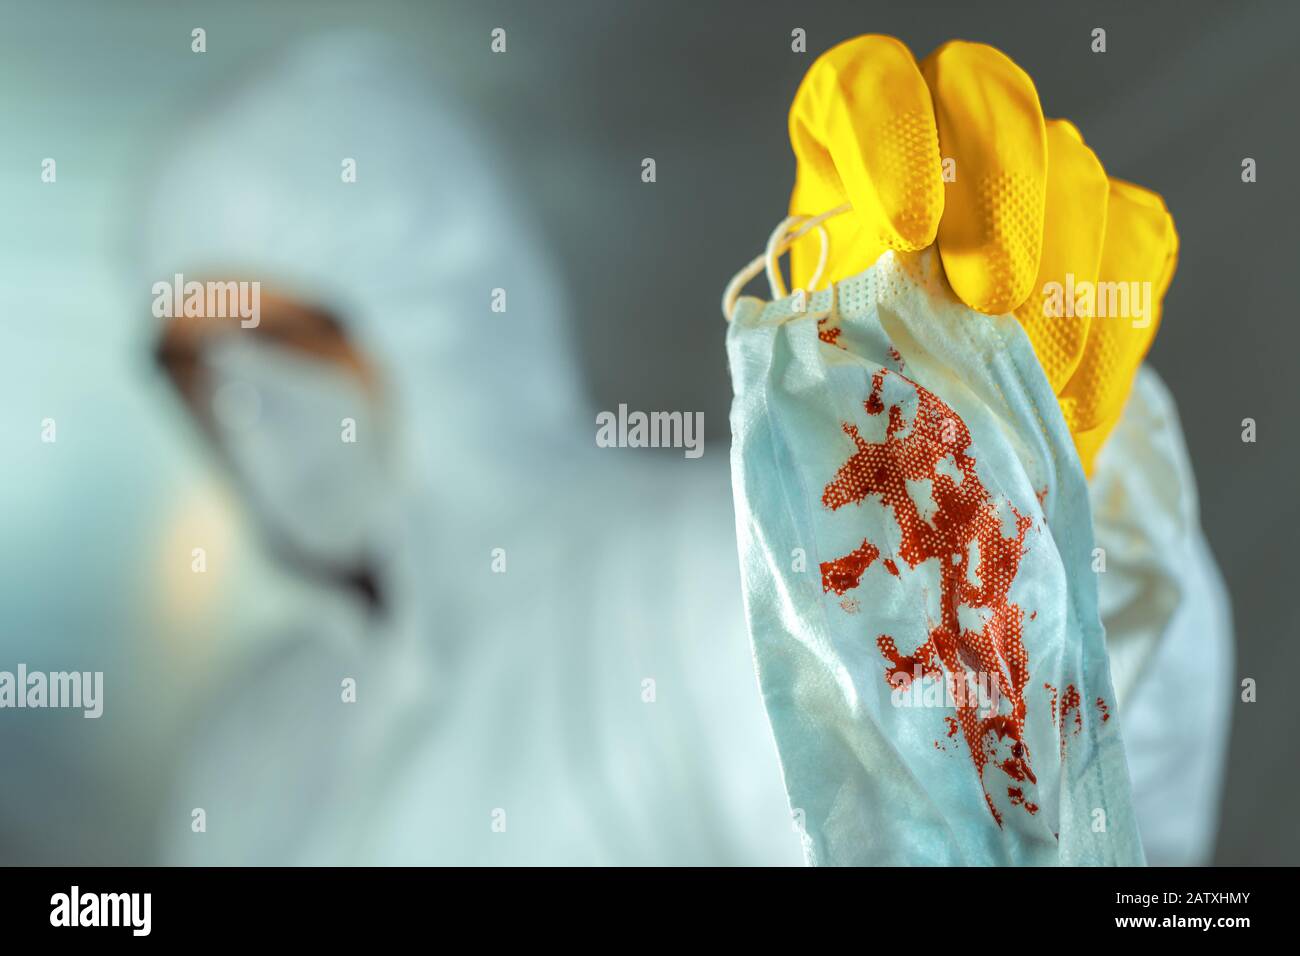 Medical worker disposing bloody protective face respirator mask in quarantine, selective focus Stock Photo